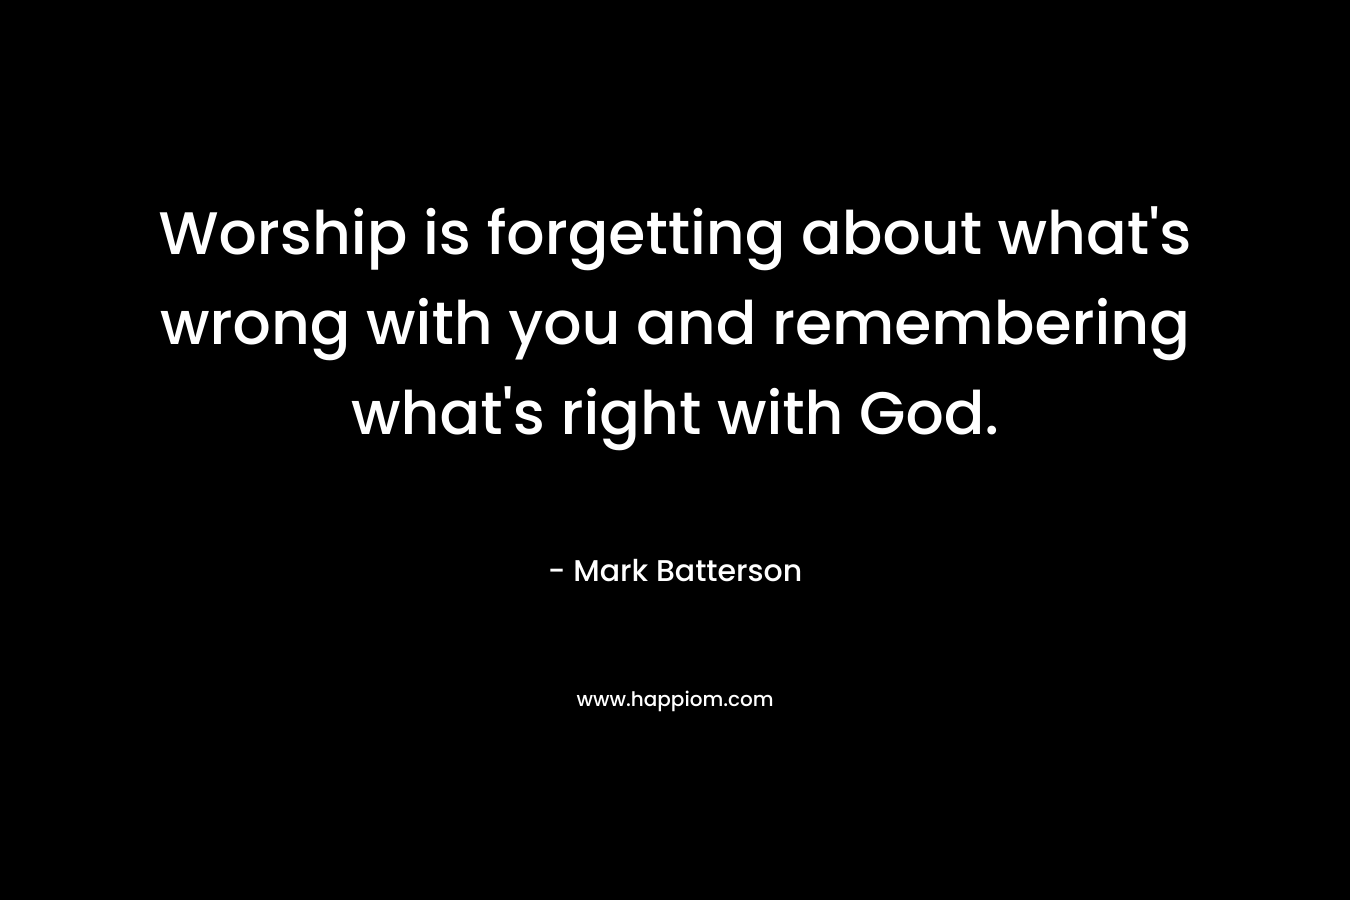 Worship is forgetting about what’s wrong with you and remembering what’s right with God. – Mark Batterson